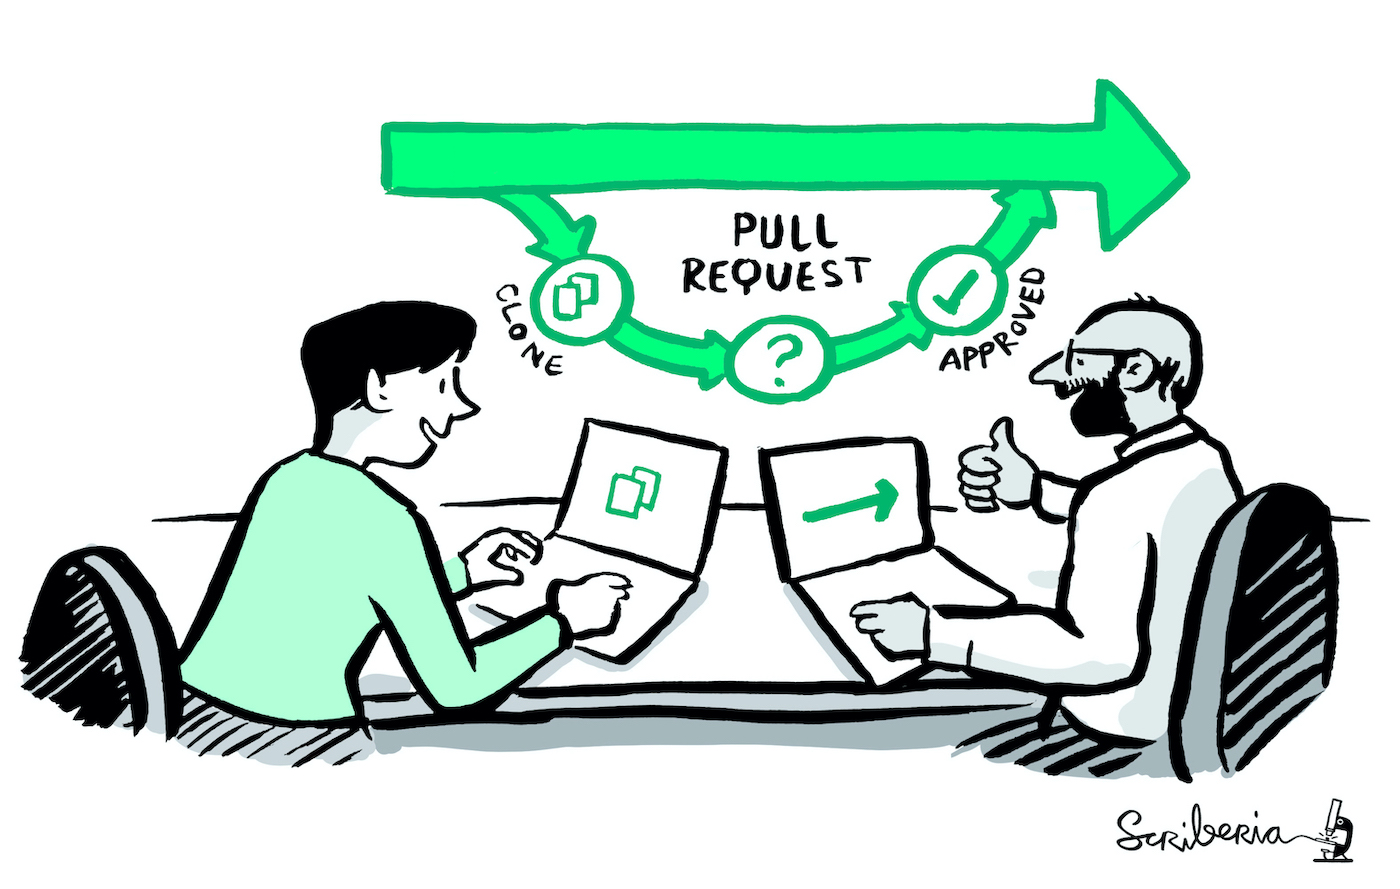 An illustration showing a contributor making their first pull request. Two people sit at a desk, with laptop computers, working together. One is writing a contribution, while the other approves the pull request. Above the people is a schematic representation of the pull request process. A contributor clones the project and makes their changes. They then create a pull request which, when approved, is merged back into the upstream project.